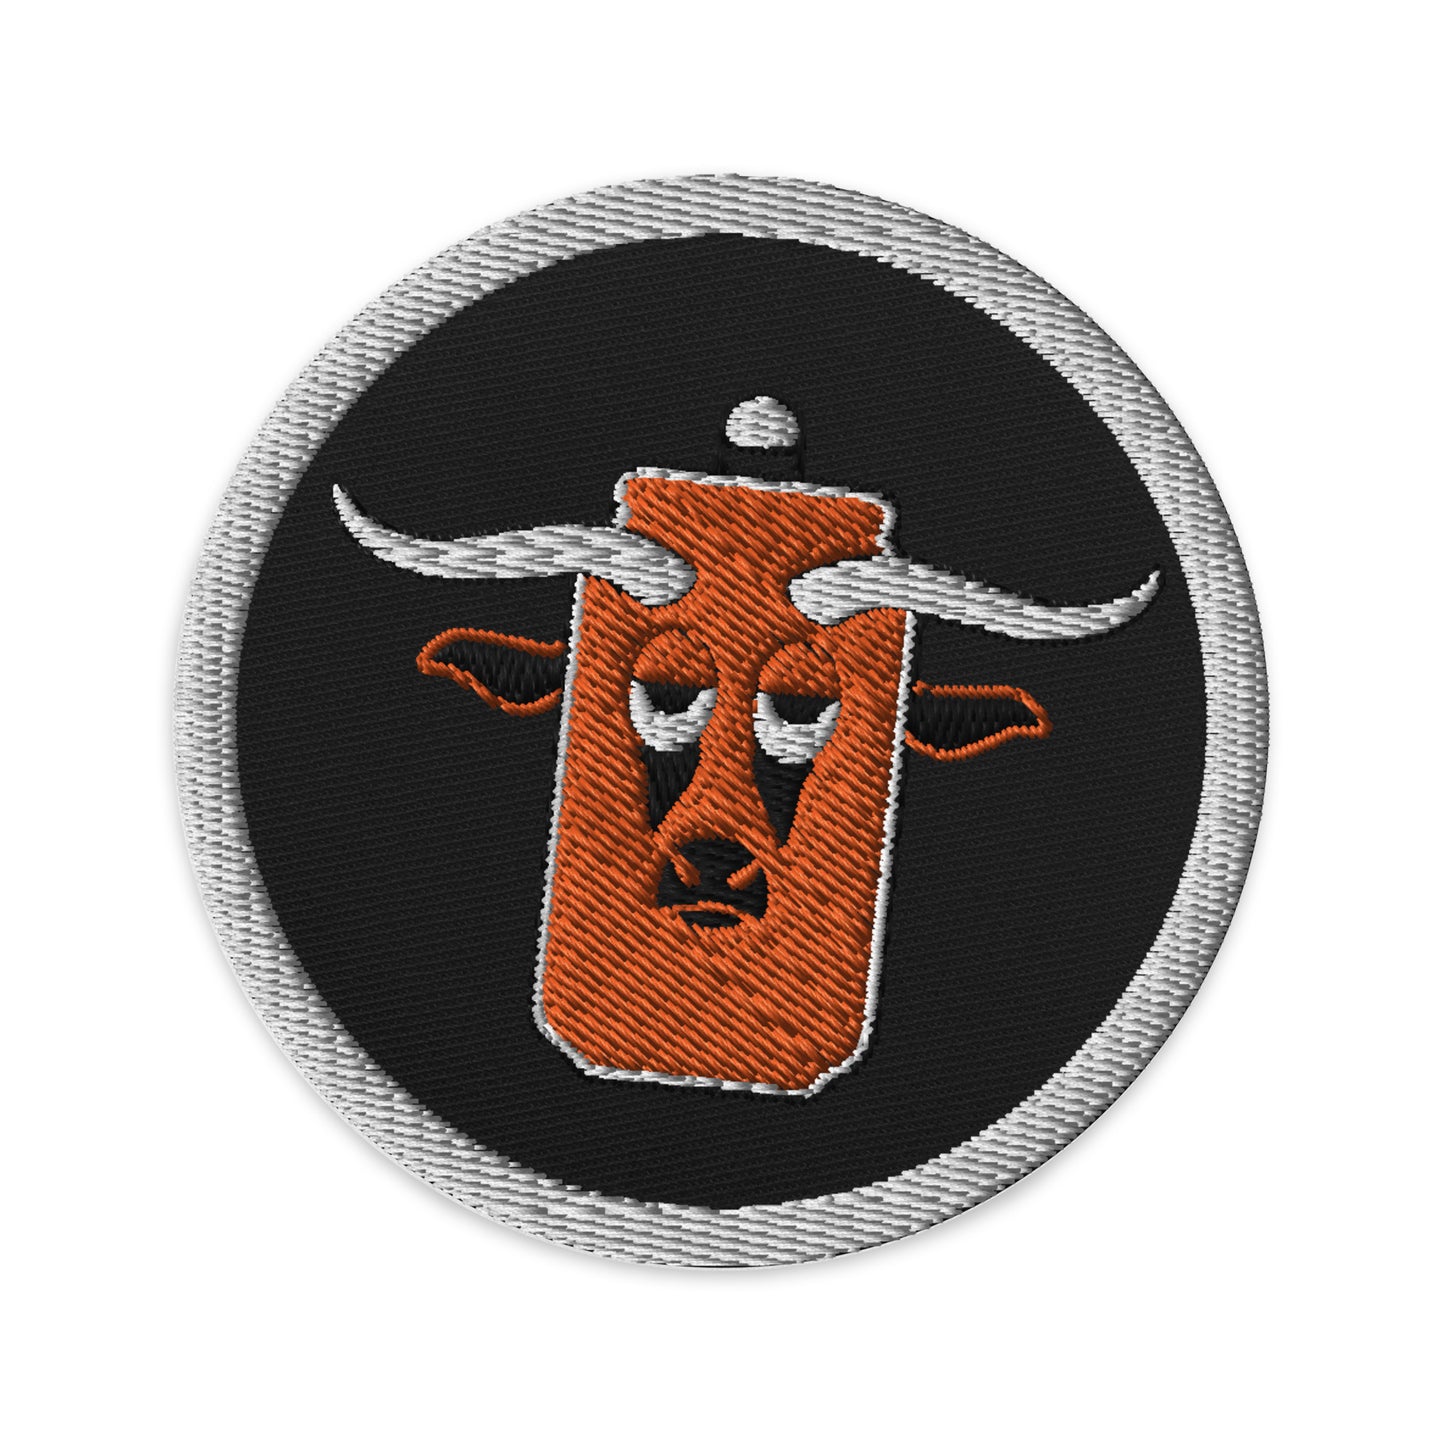 NotTexas patch